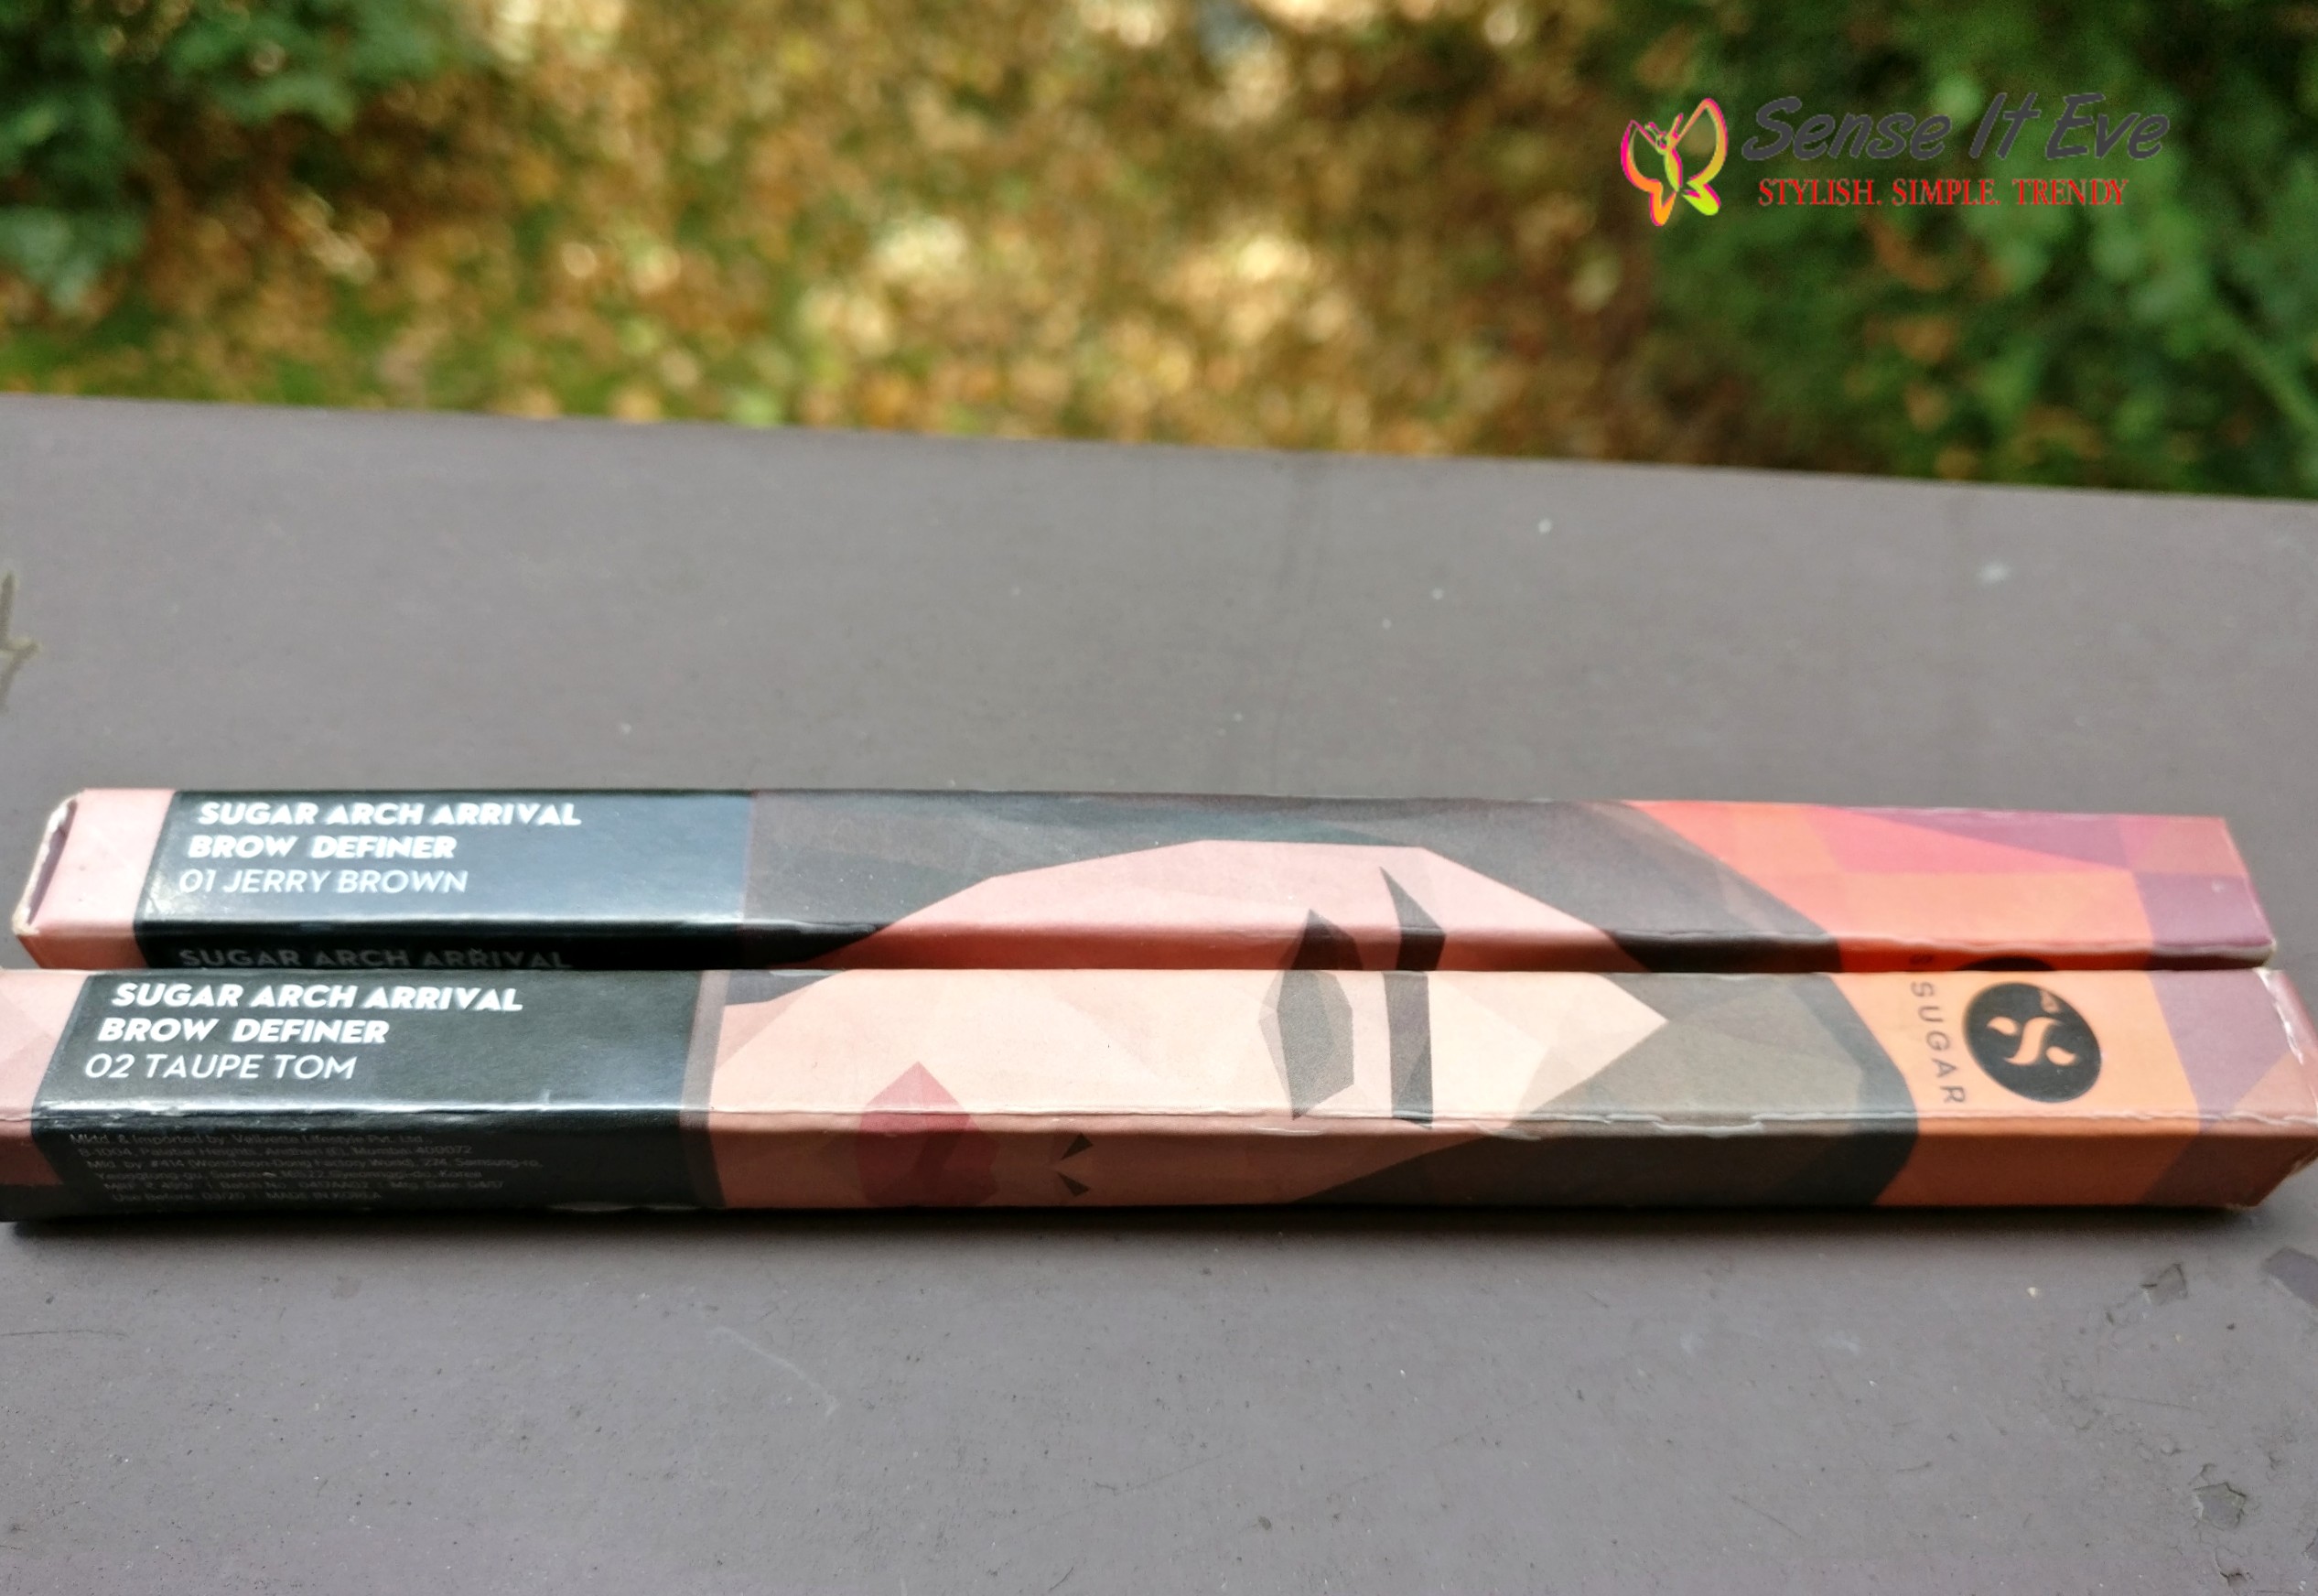 SUGAR Arch Arrival Brow Definer Review Sense It Eve SUGAR Arch Arrival Brow Definer 01 Jerry Brown, 02 Taupe Tom : Review & Swatches